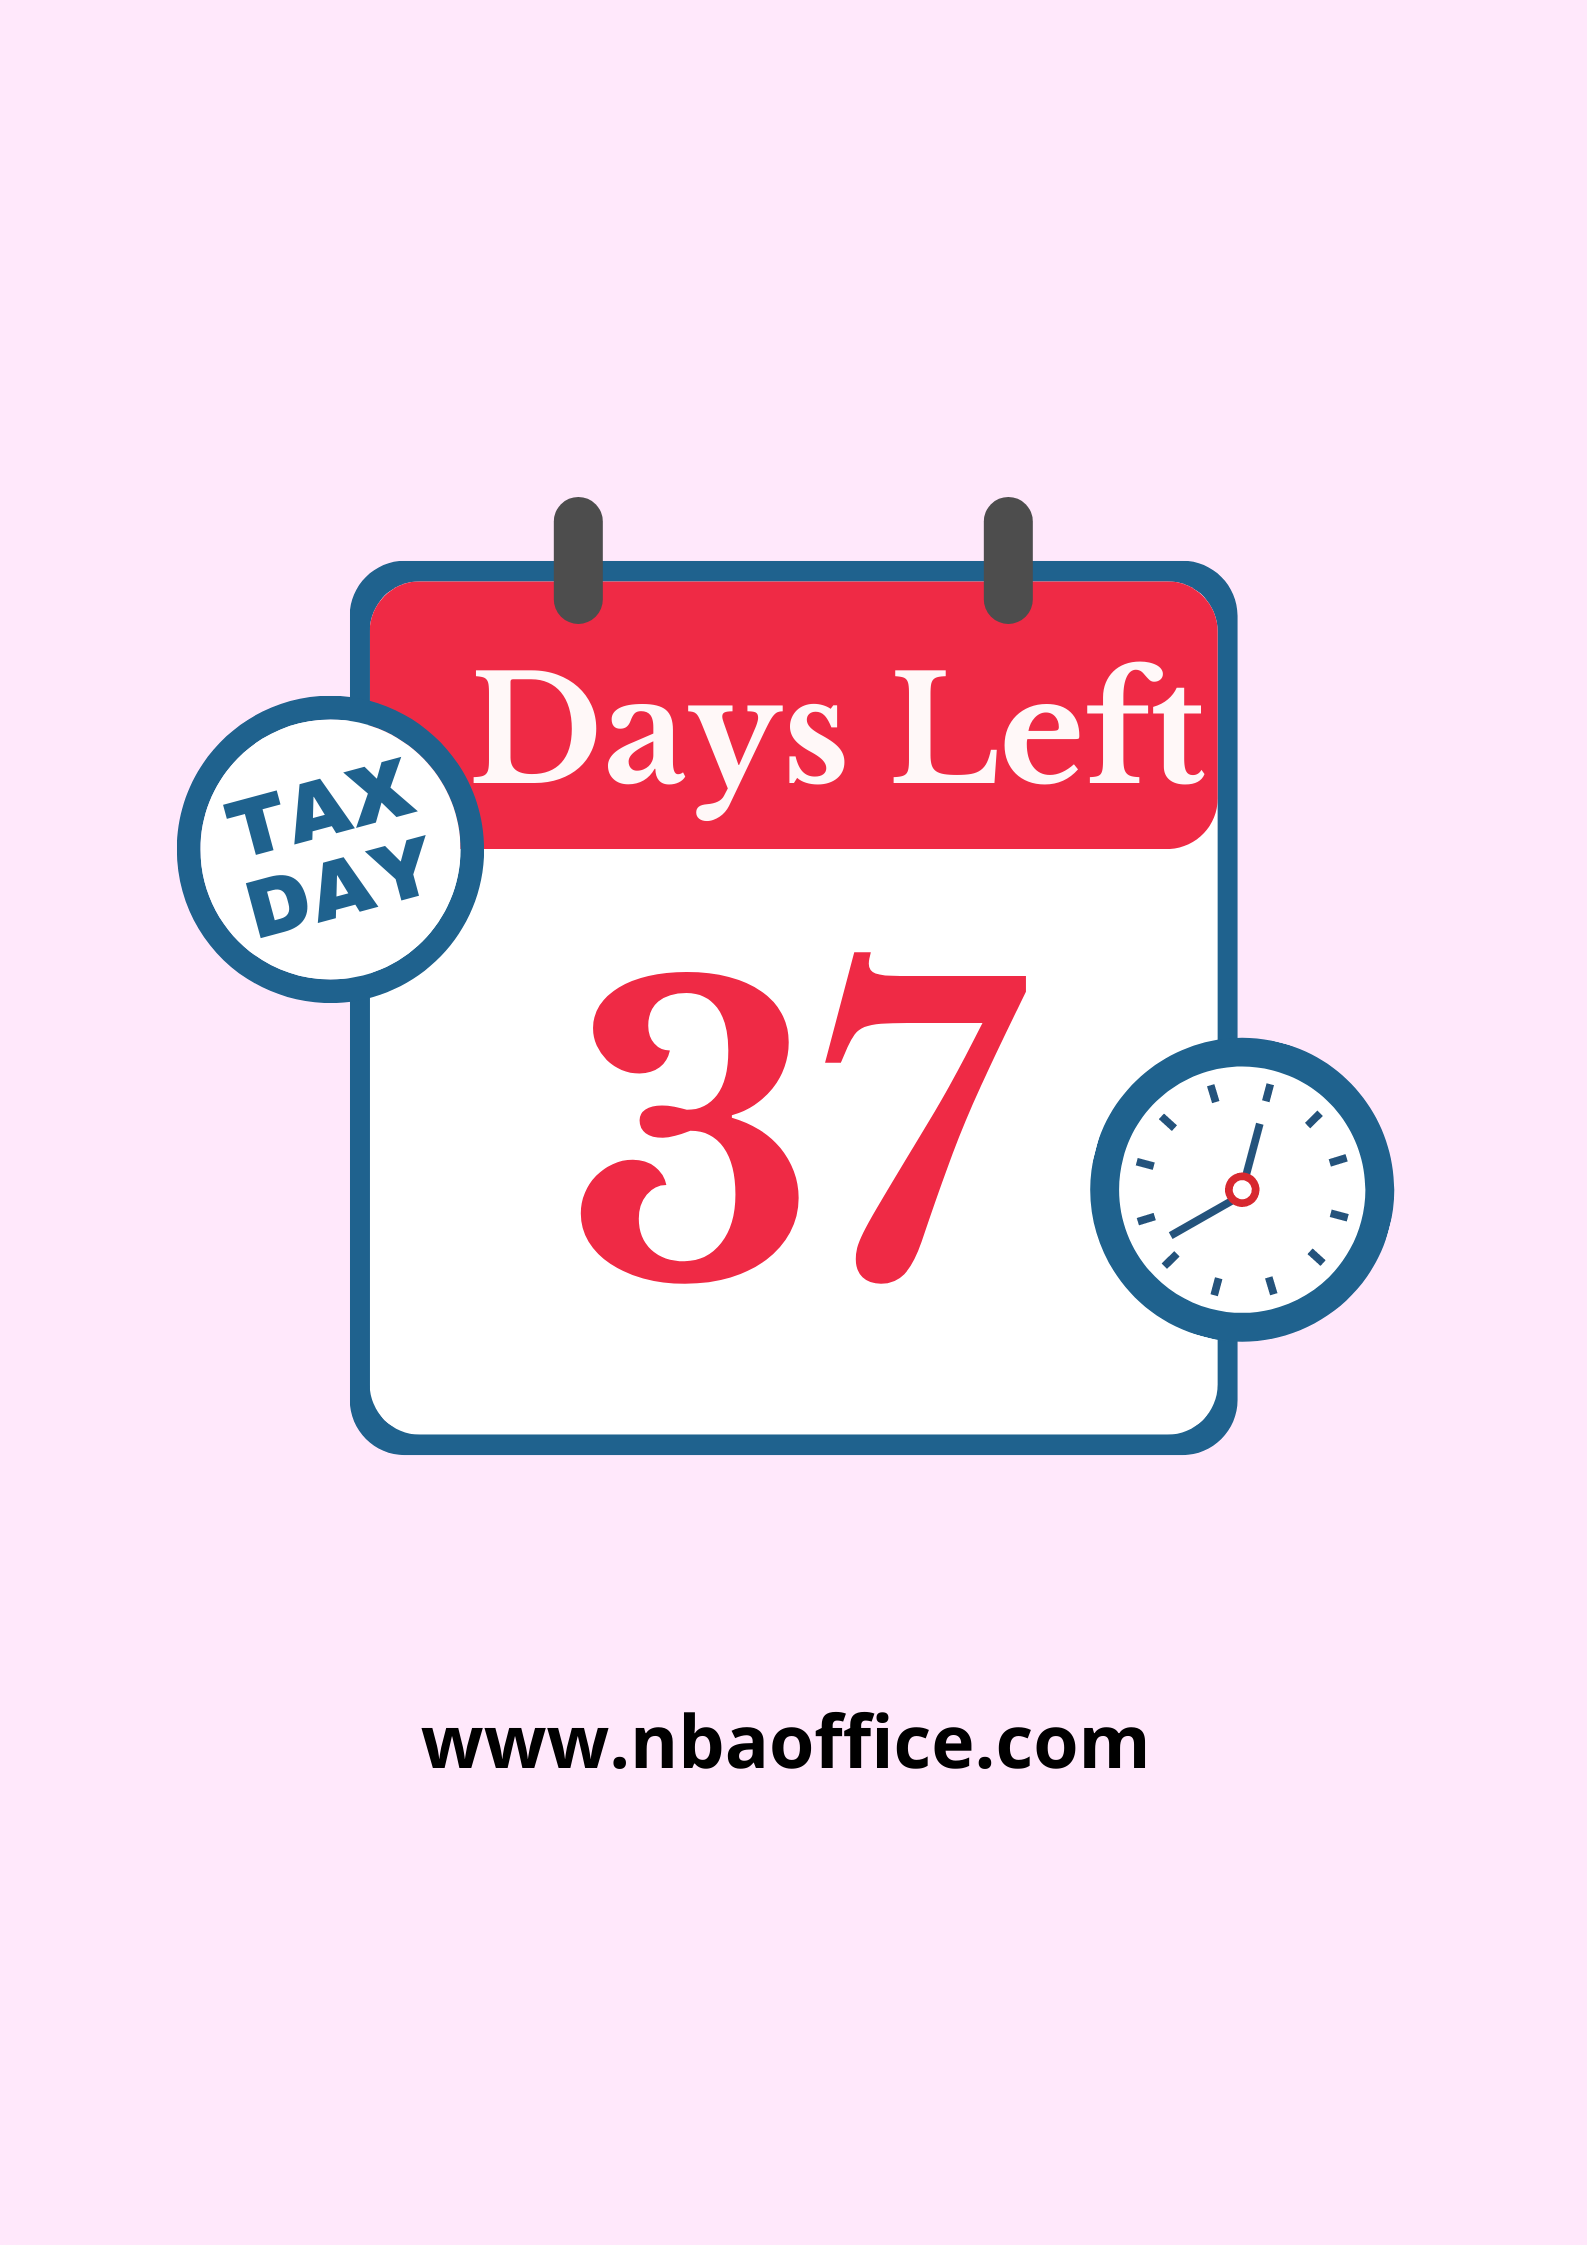 Only 37 Days Left to File Your ITR: Don’t Miss the Deadline!